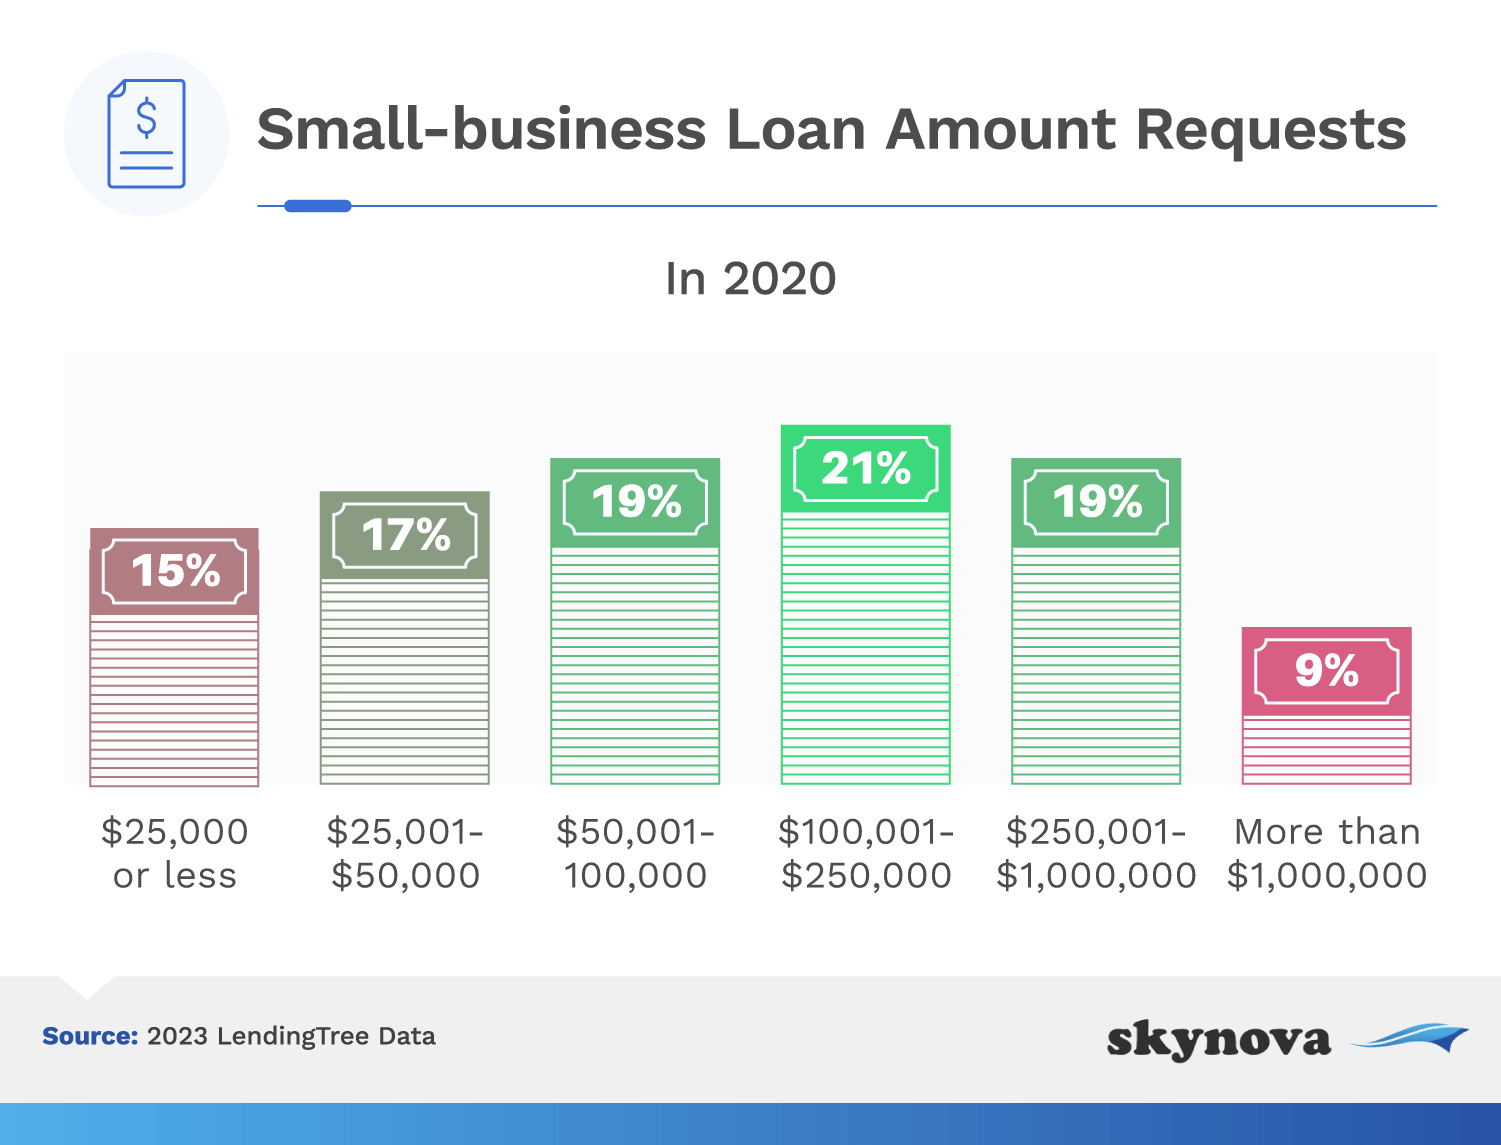 Data: Small business loan amount requests